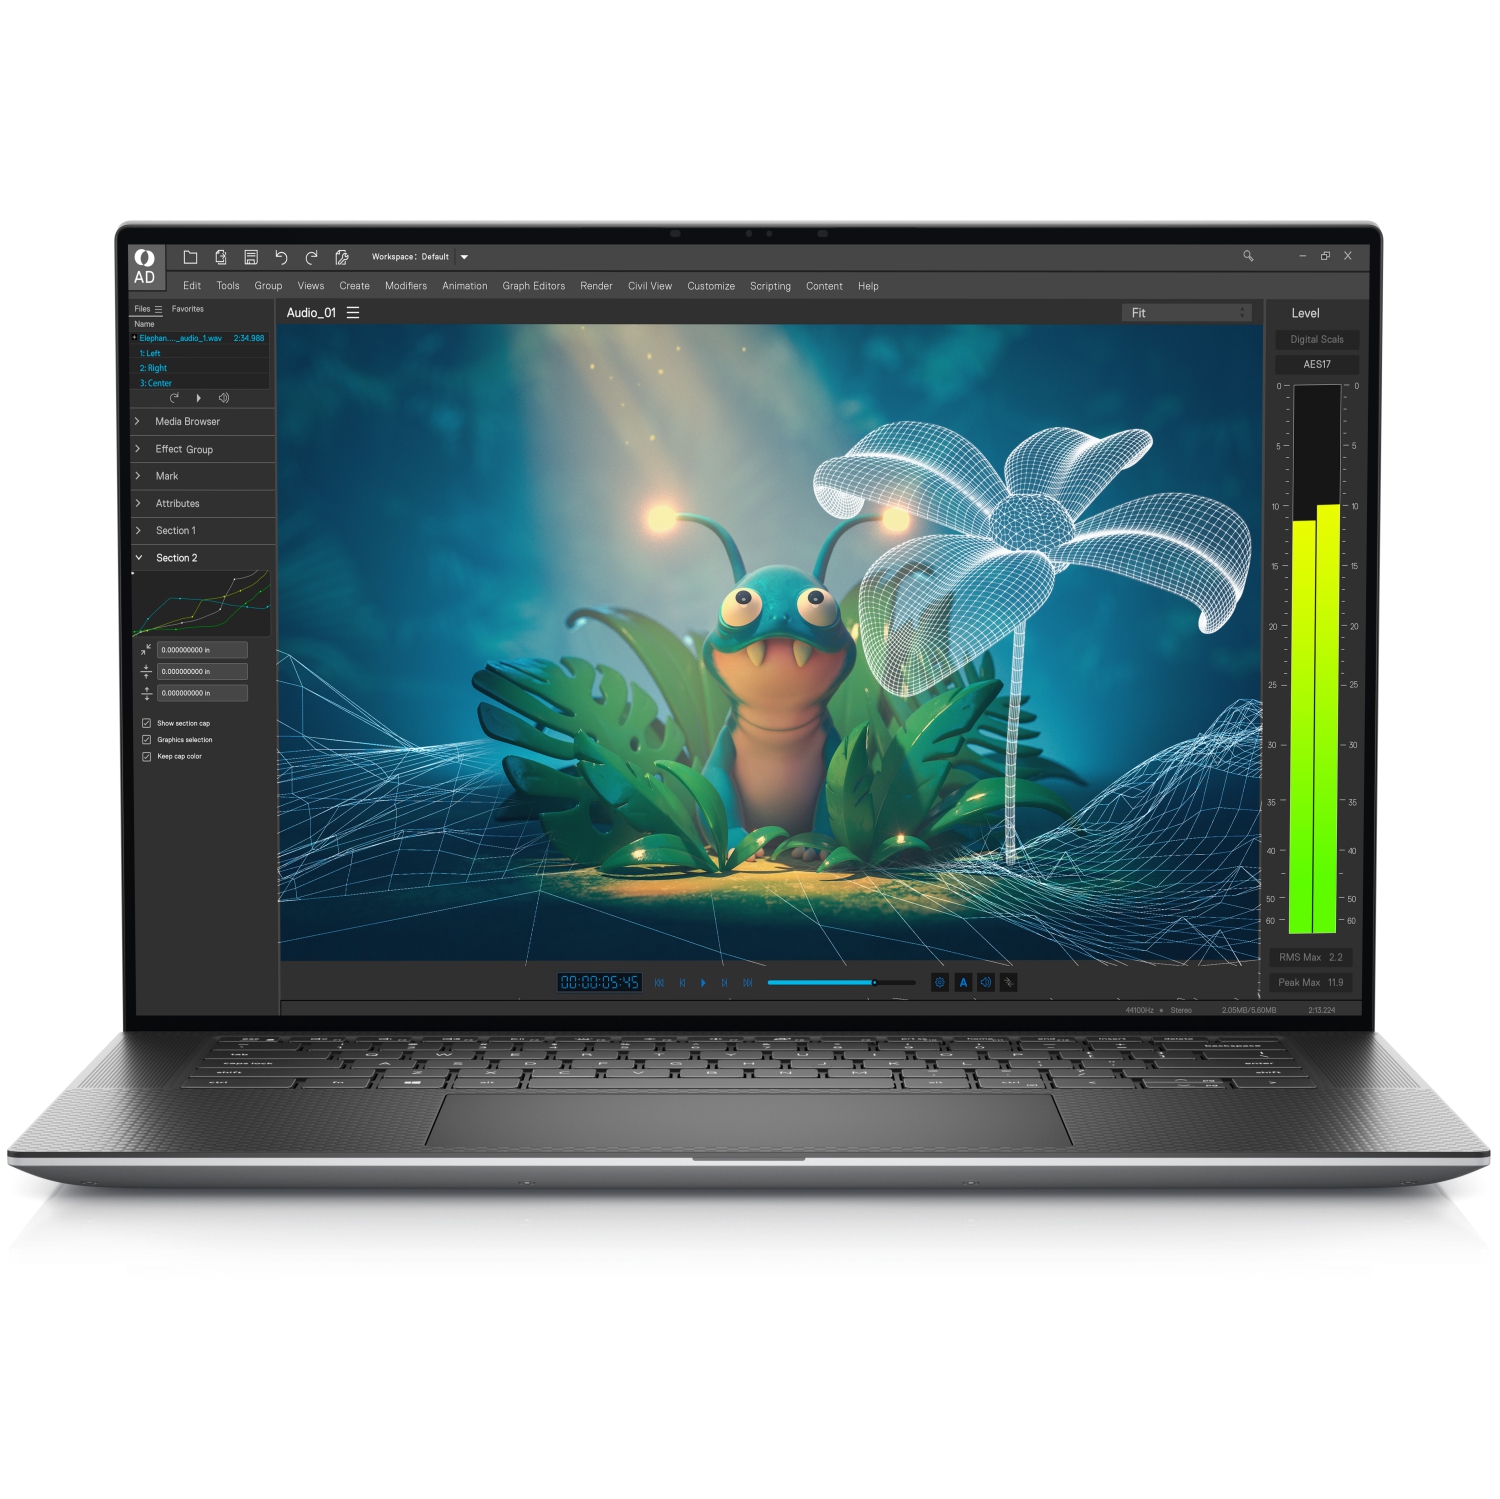 Refurbished (Excellent) – Dell Precision 5000 5570 Workstation Laptop (2022) | 15.6" FHD+ | Core i5 - 256GB SSD - 32GB RAM - RTX A1000 | 12 Cores @ 4.5 GHz - 12th Gen CPU